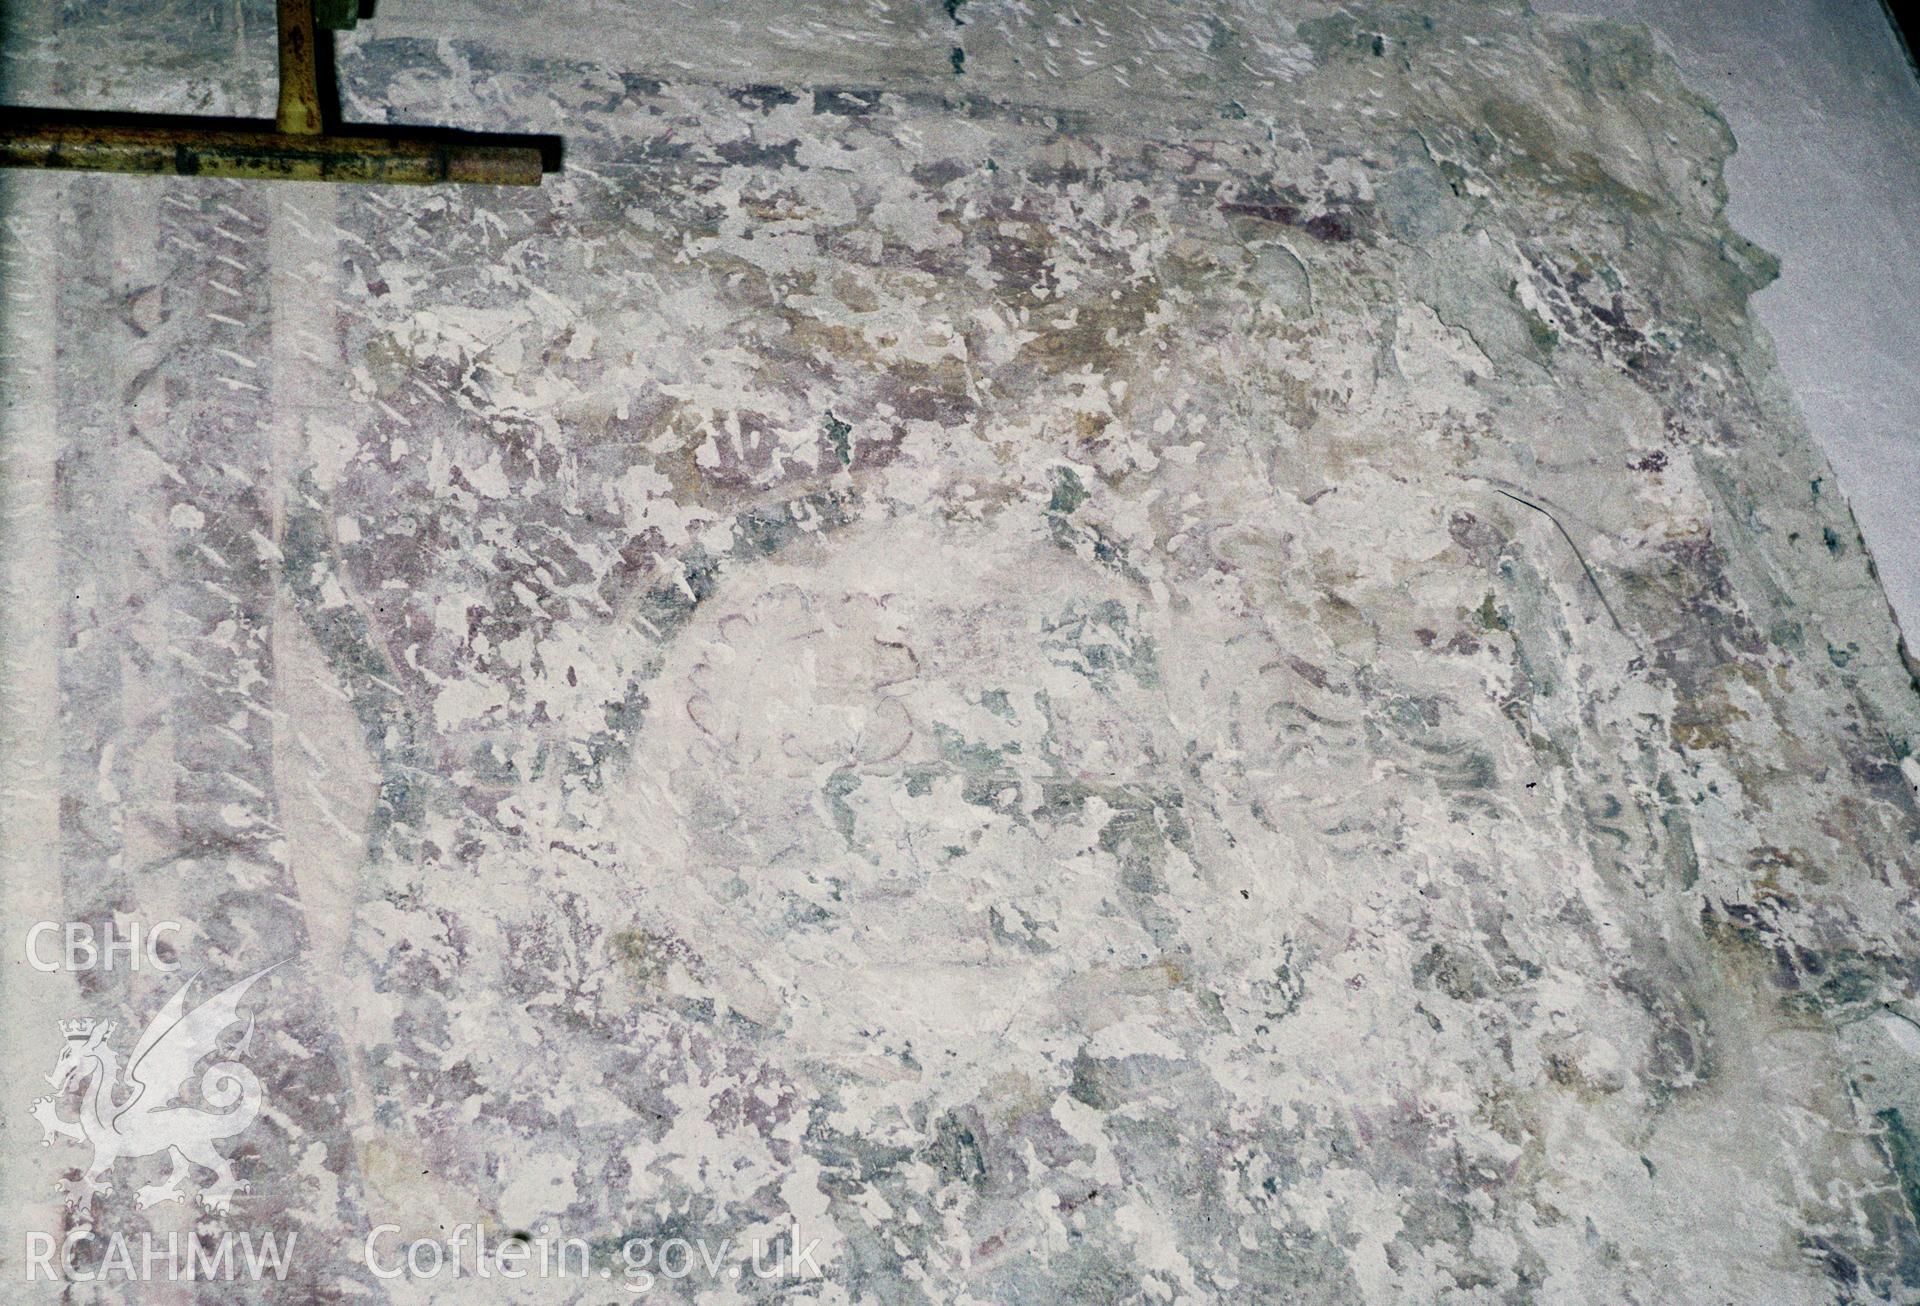 35mm colour slide showing the wallpainting at St. Melangells' Church, Pennant by Dylan Roberts, undated.